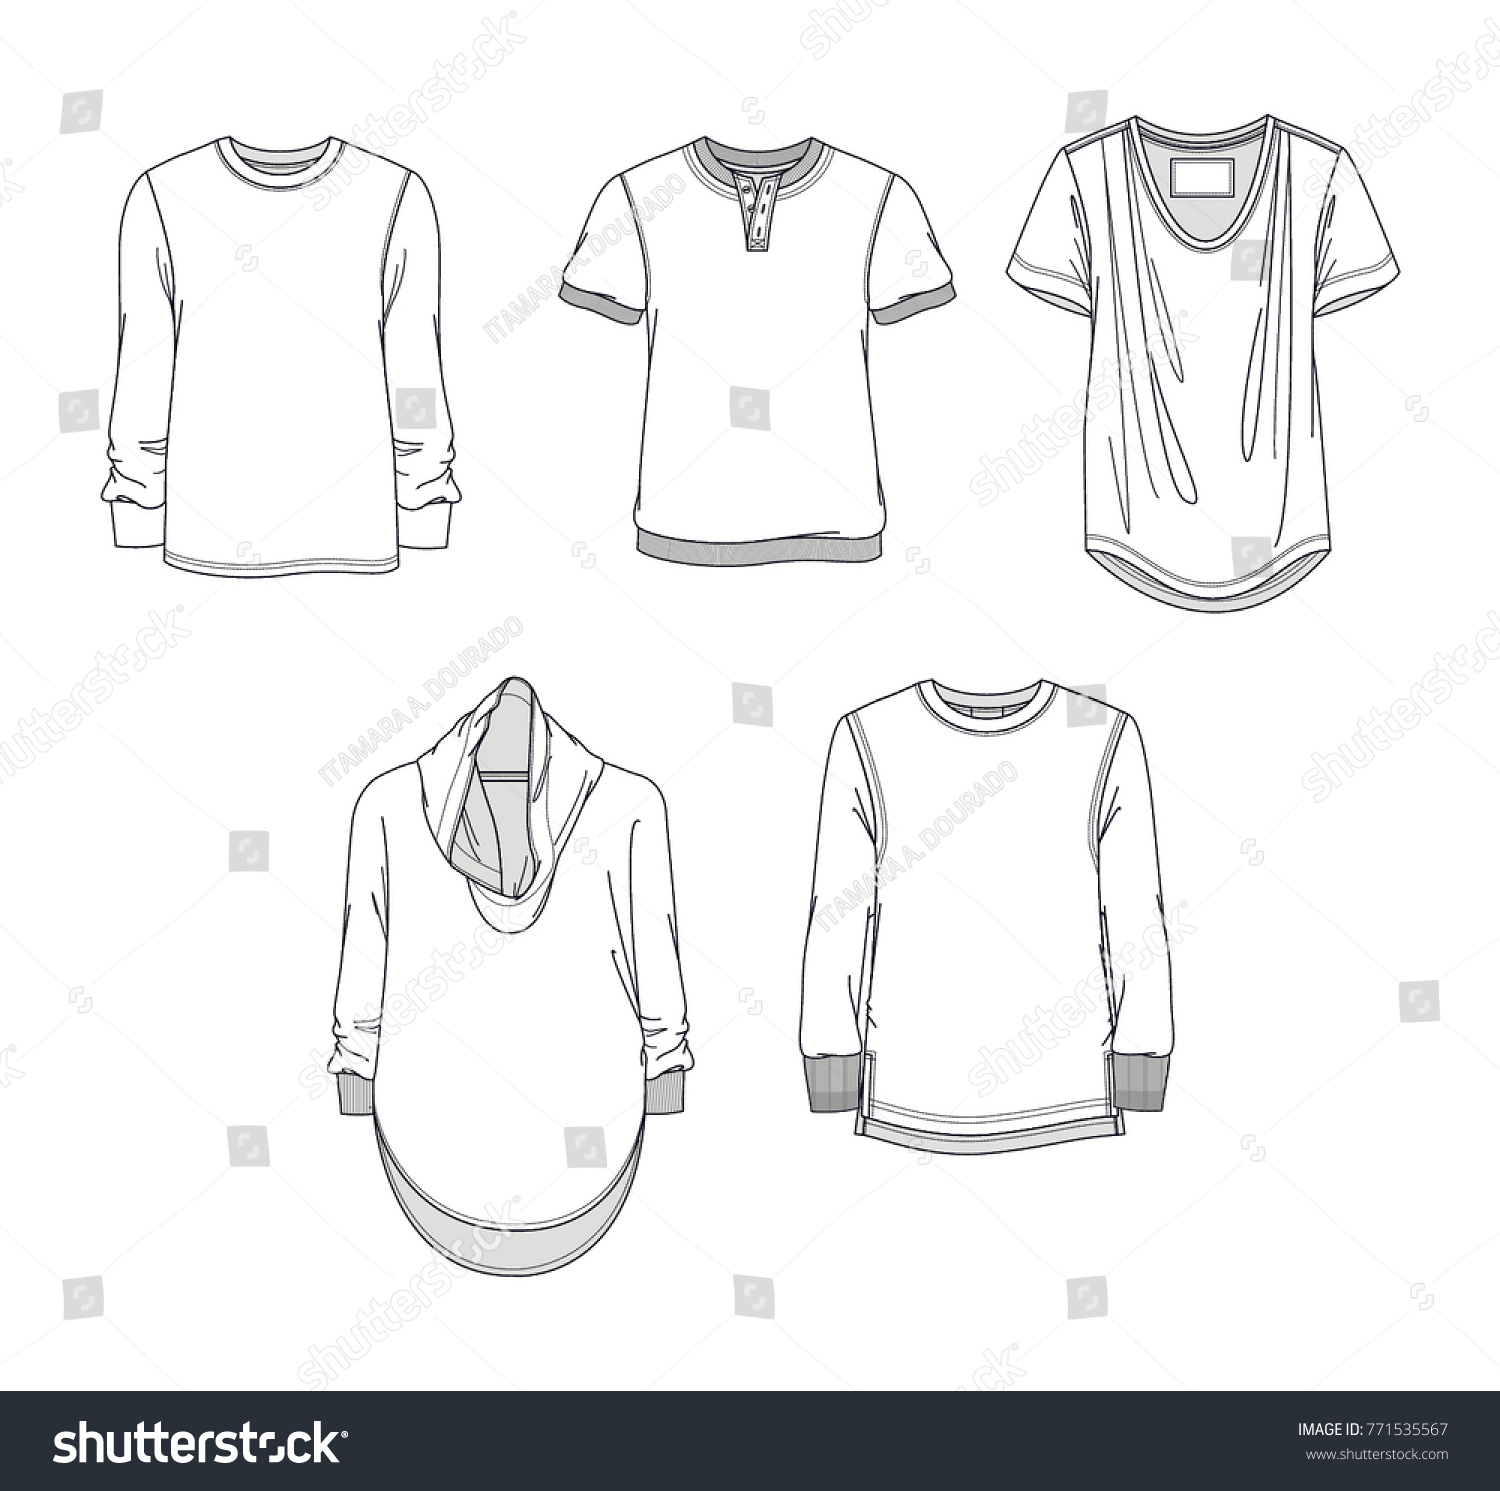 5,551 Mens clothes drawing Images, Stock Photos & Vectors | Shutterstock